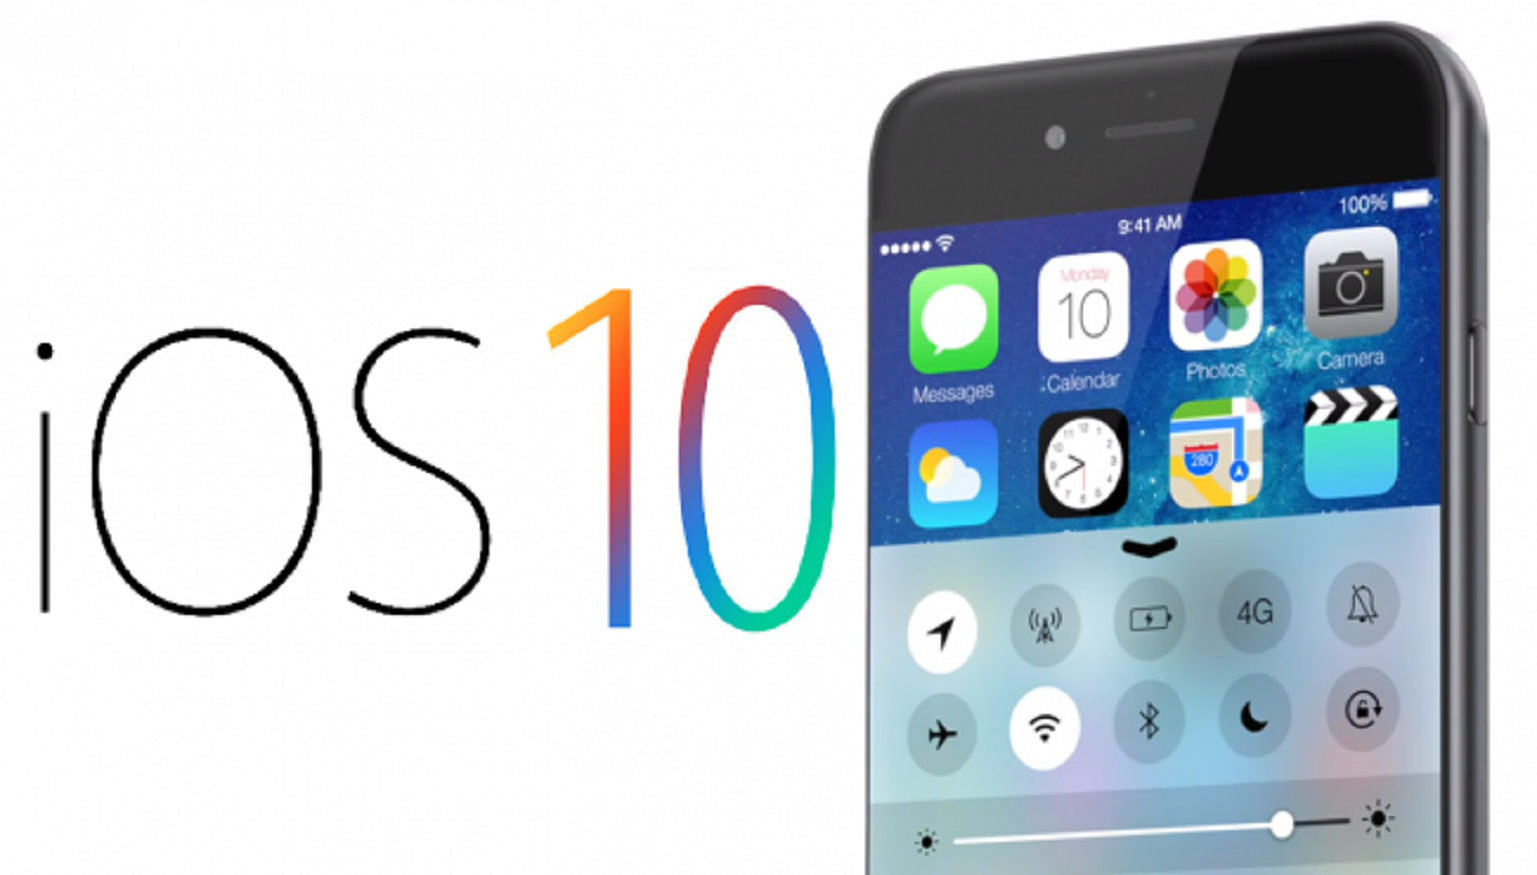 iOS 10 Wallpapers Images Photos Pictures Backgrounds